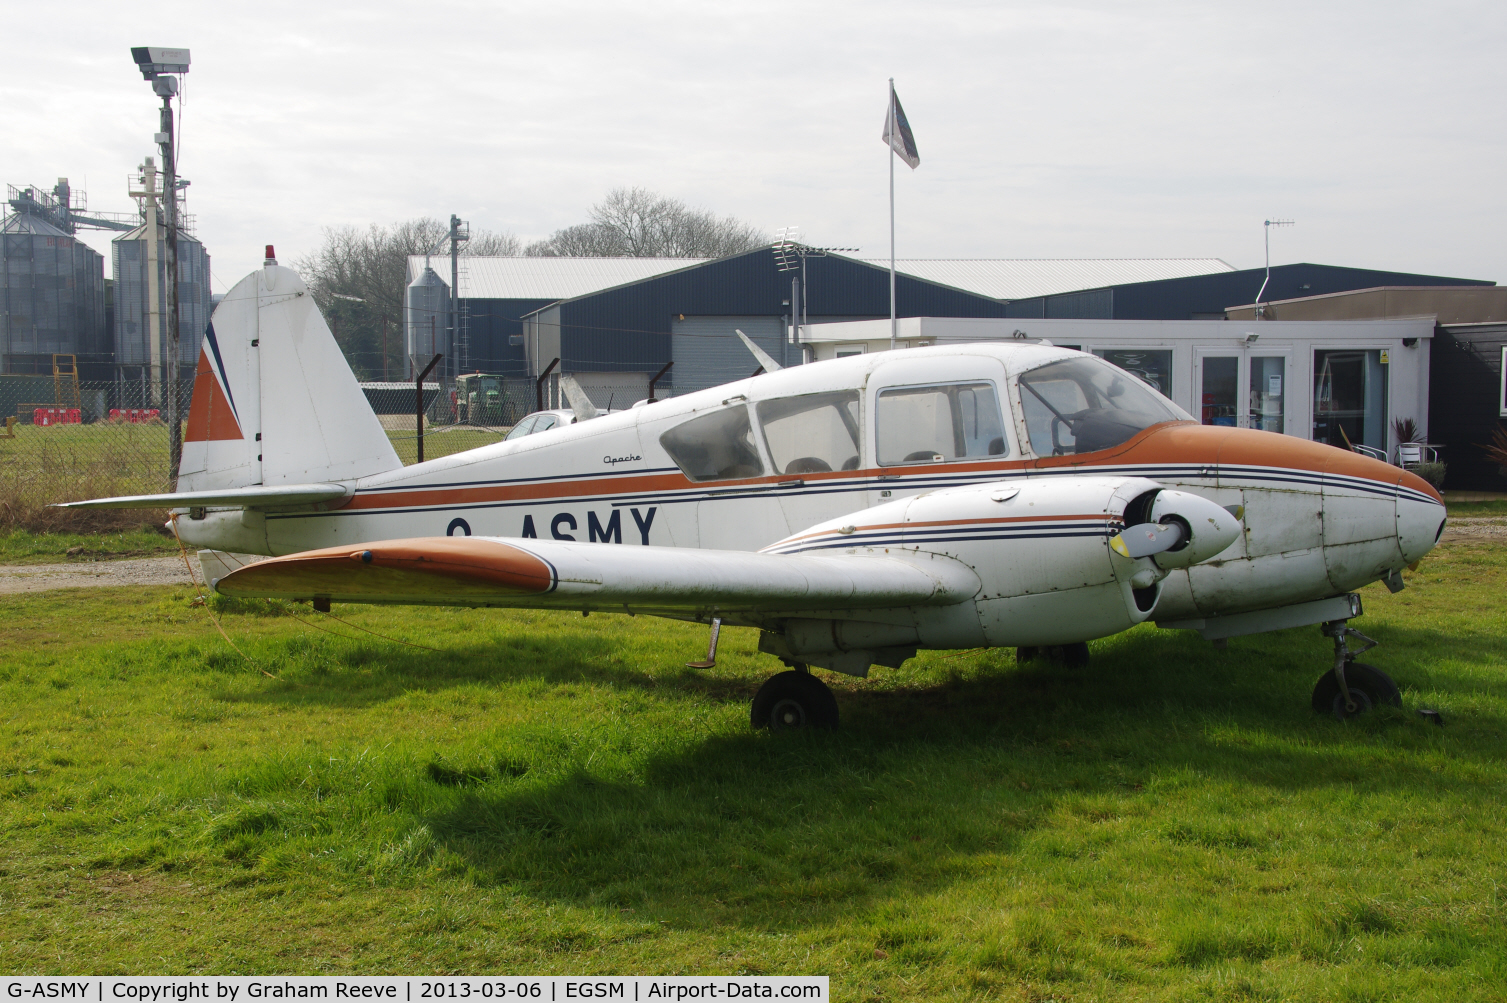 G-ASMY, 1962 Piper PA-23-160 Apache C/N 23-2032, Parked at Beccles.